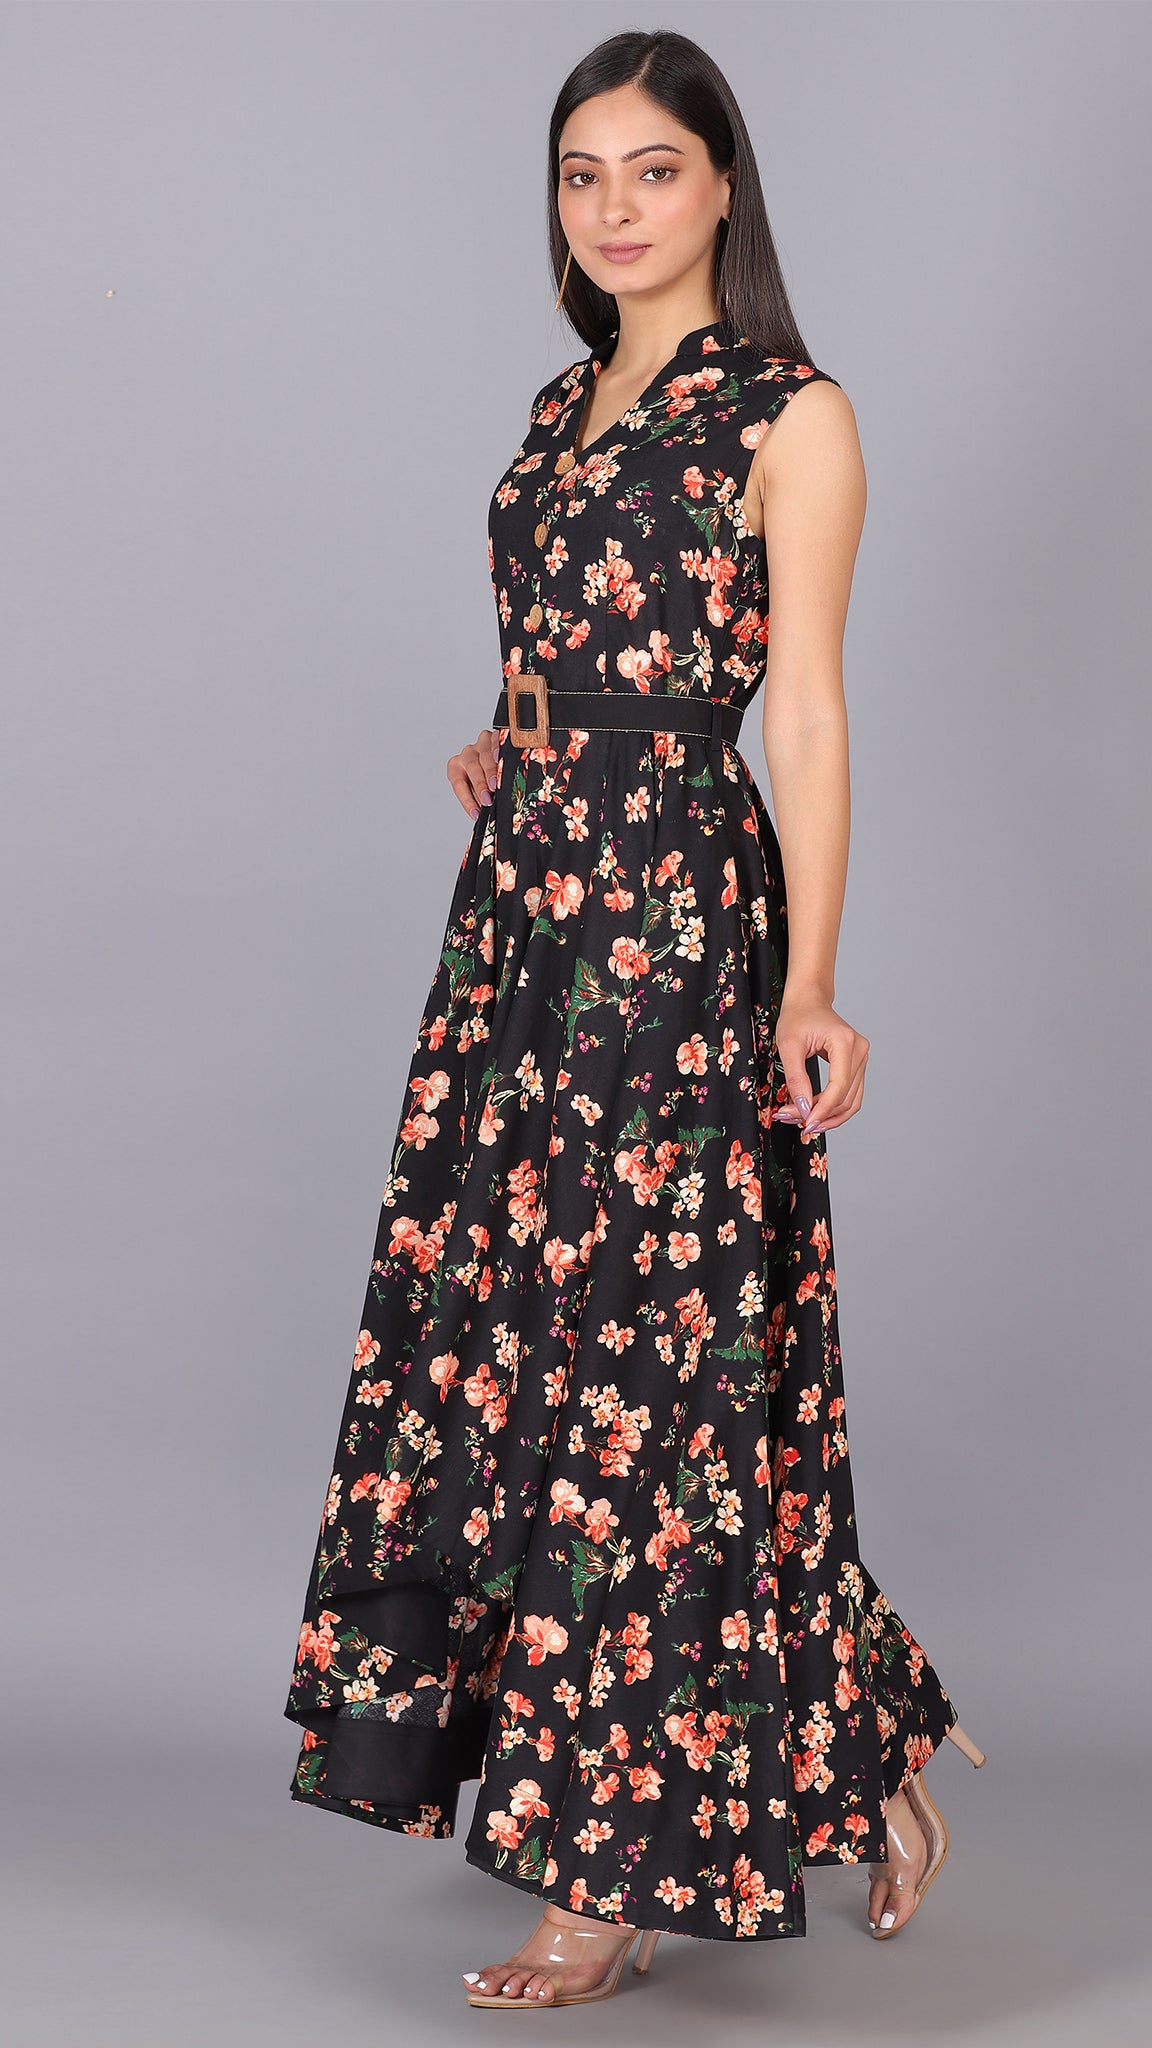 Fit & flare Floral printed maxi dress